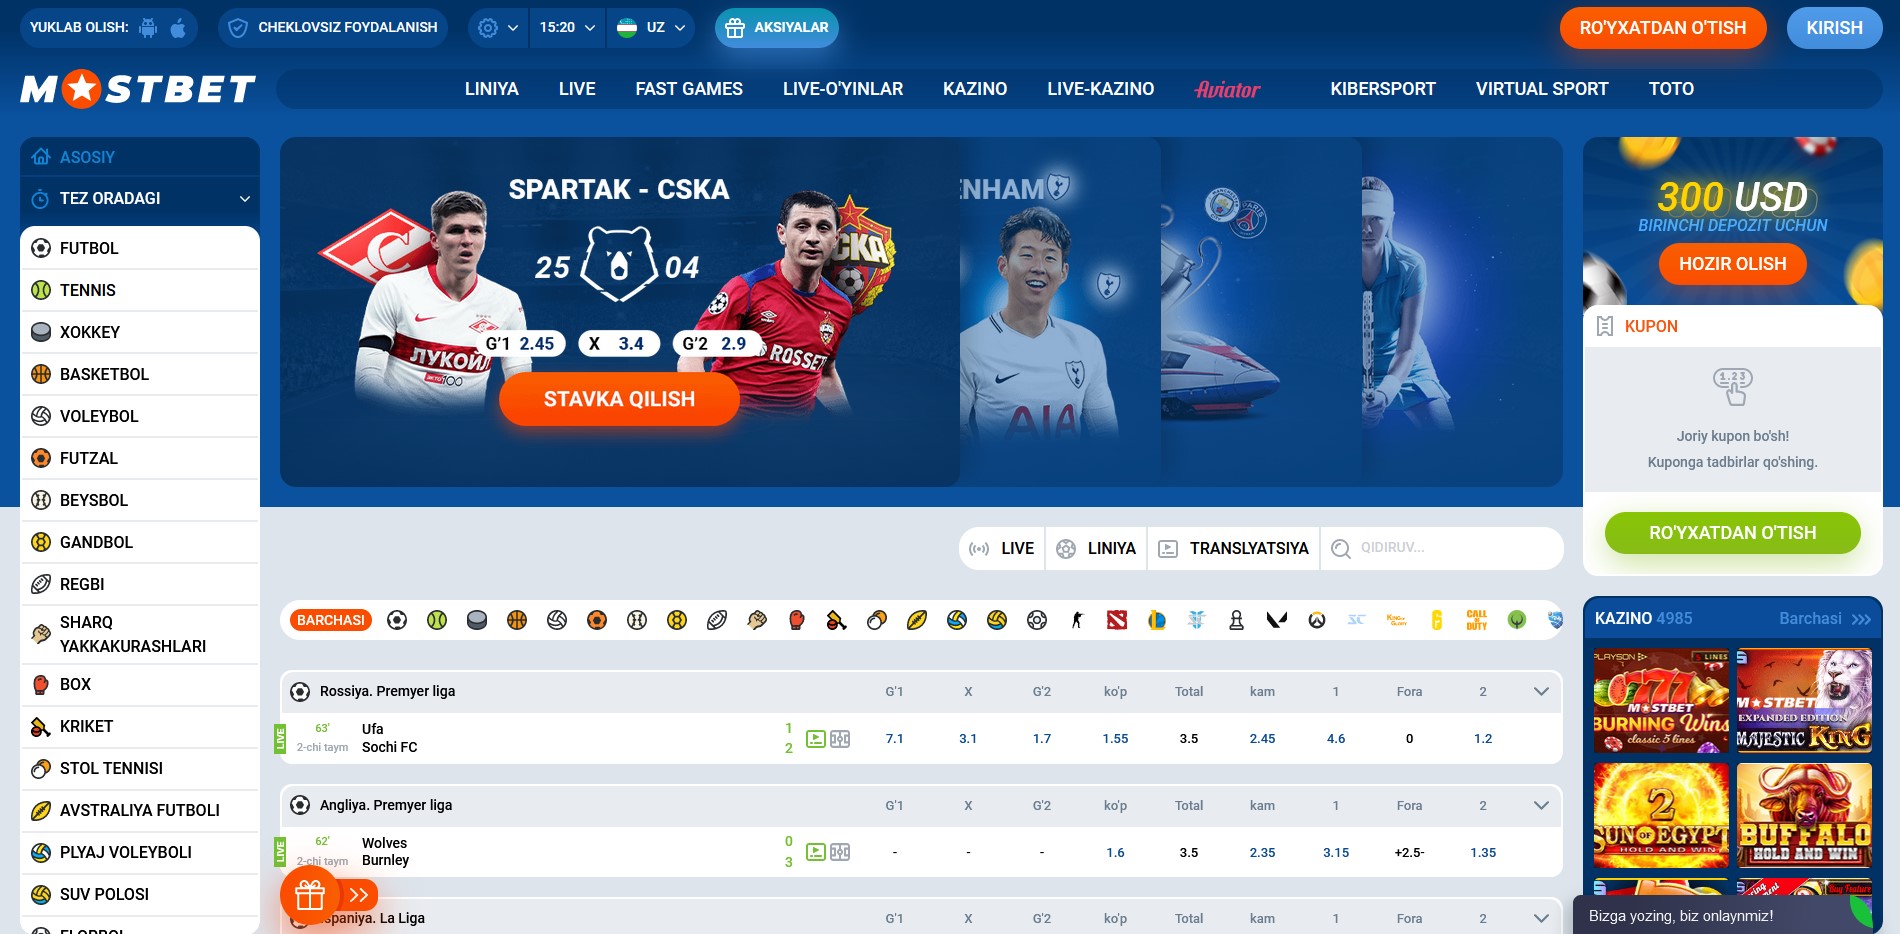 3 Easy Ways To Make Mostbet Online Betting and Casino in Turkey Faster